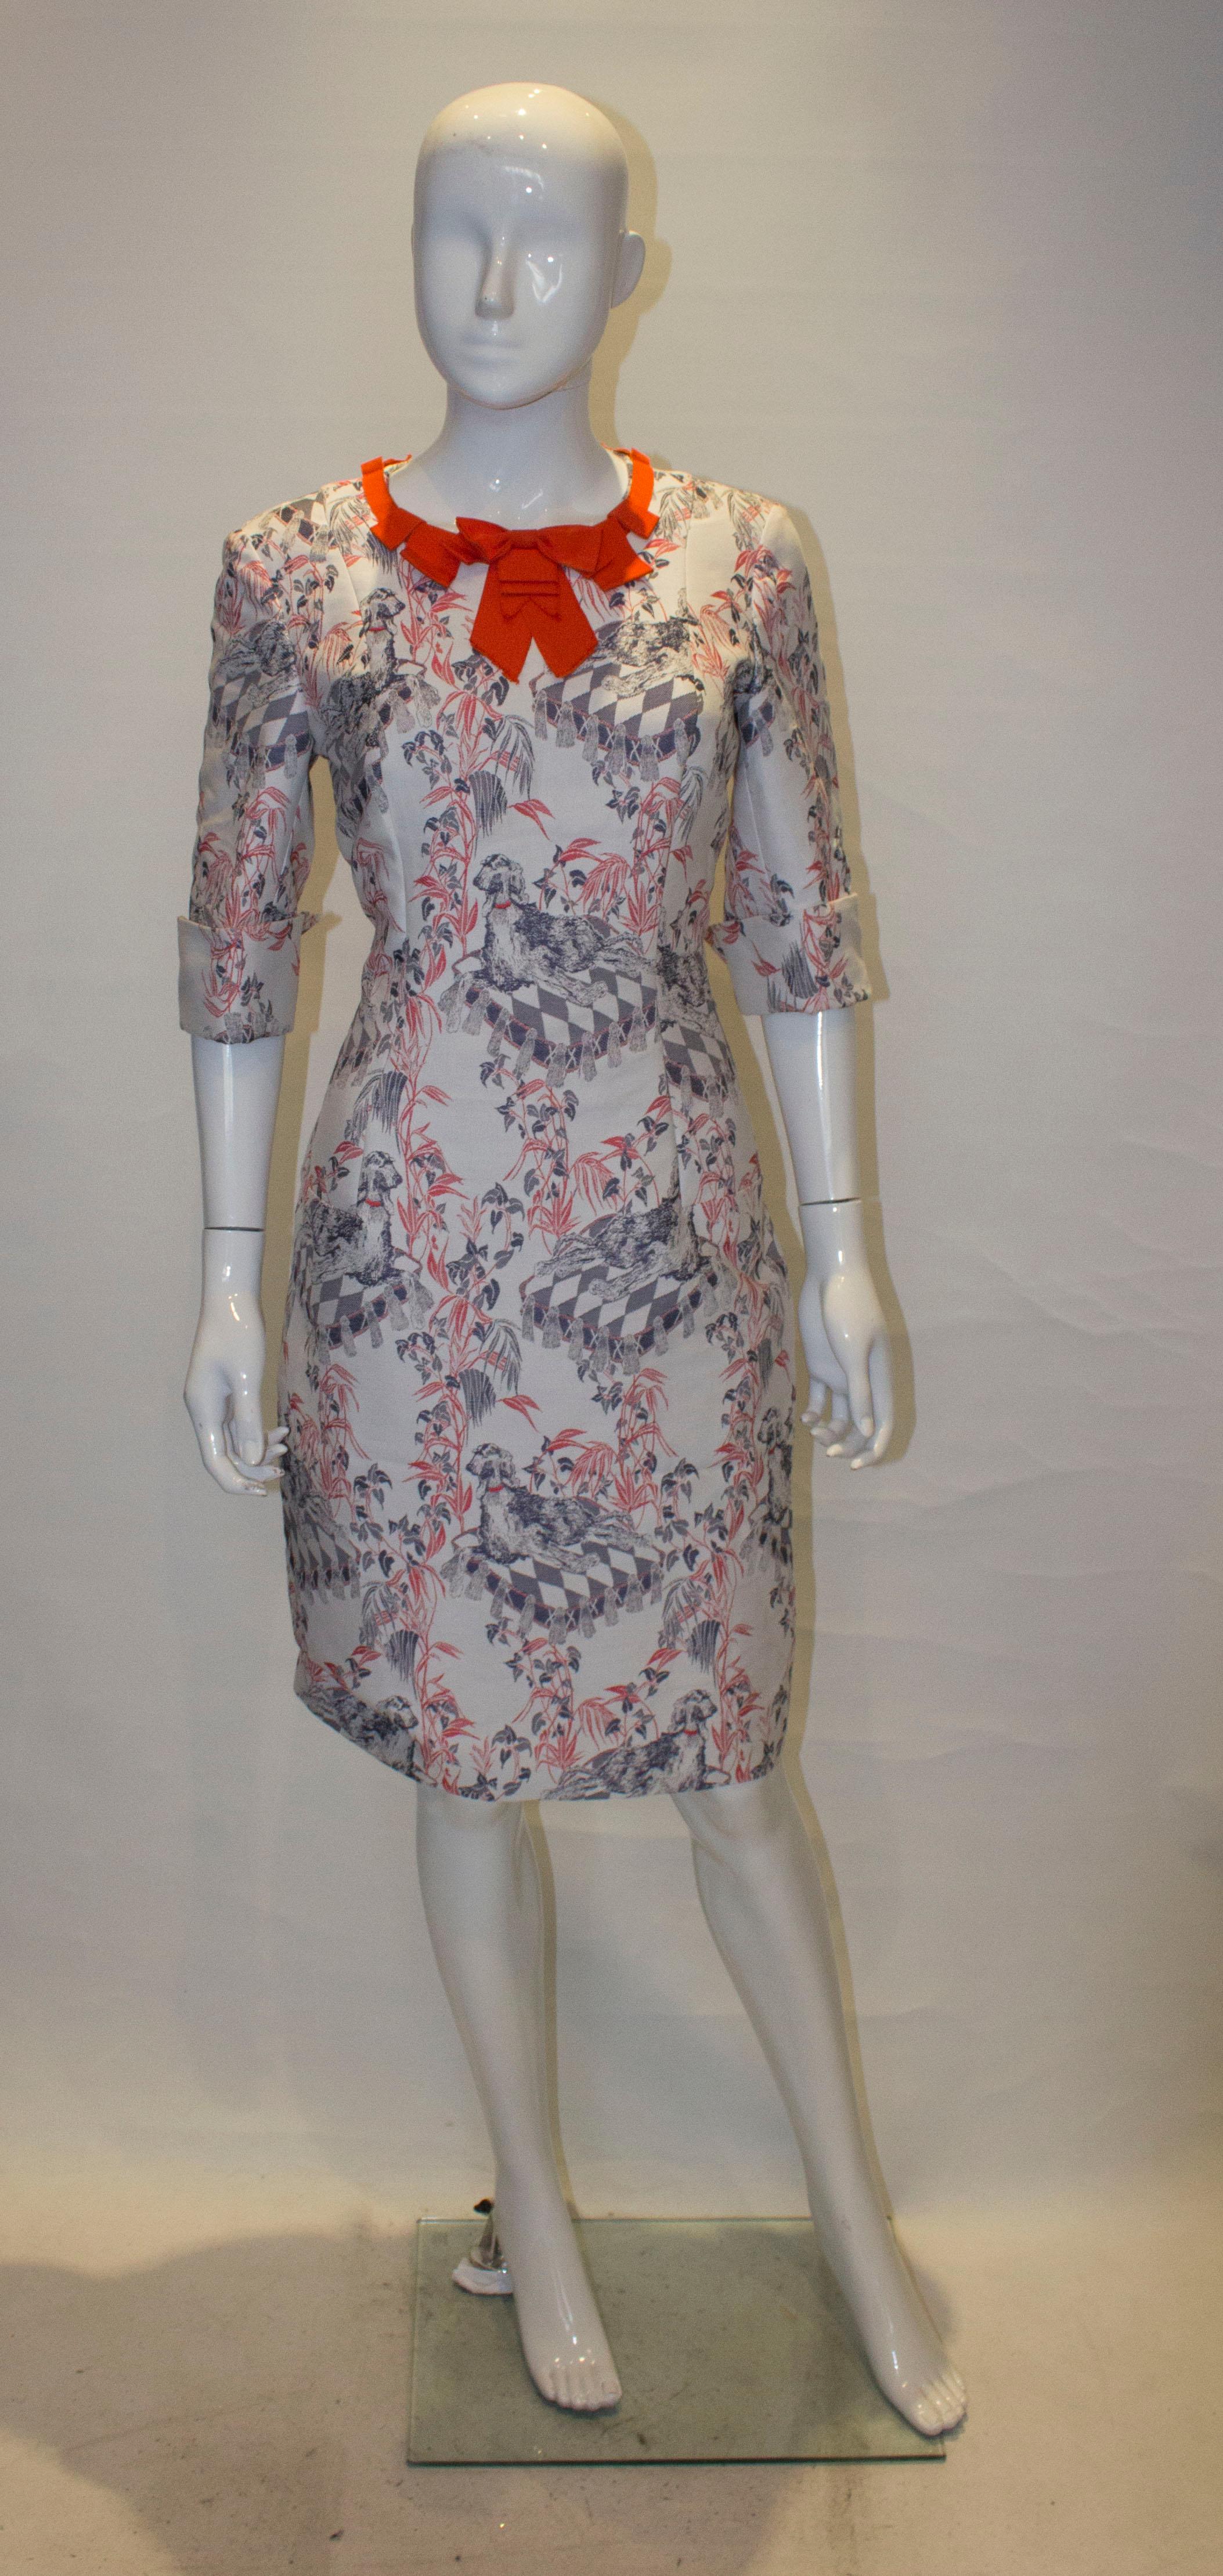 A fun dress by Giles. In a wonderful dog print with a ribbon neckline, the dress has short sleaves with cuff turn backs and is fully lined. Marked size 42